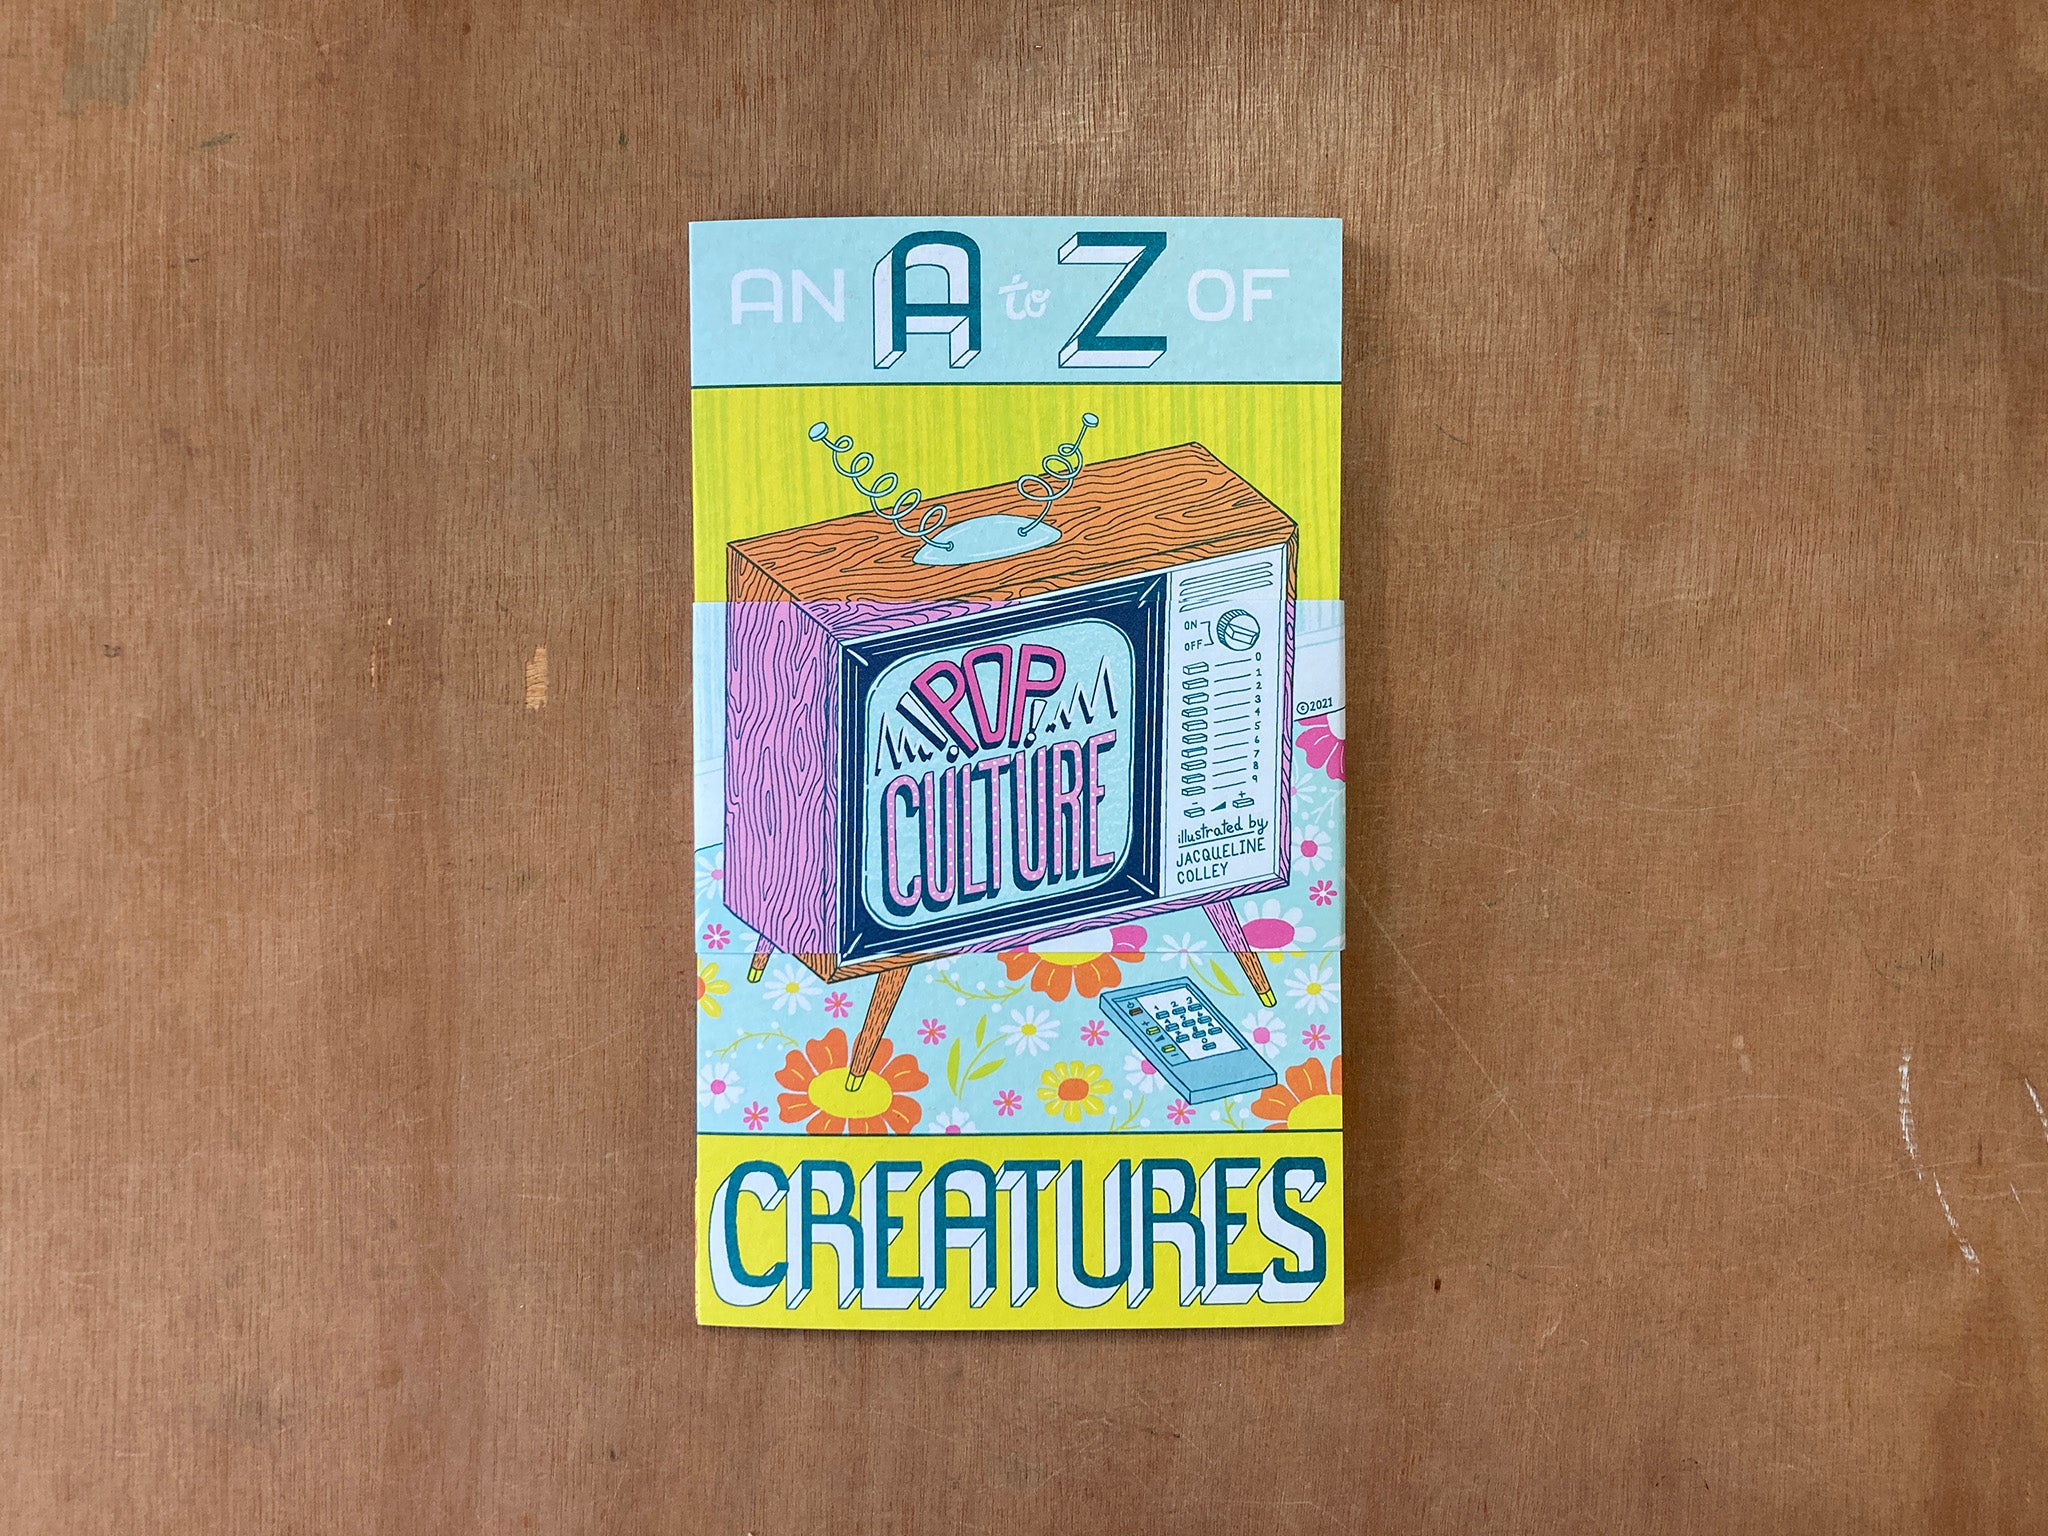 AN A TO Z OF POP CULTURE CREATURES by Jacqueline Colley